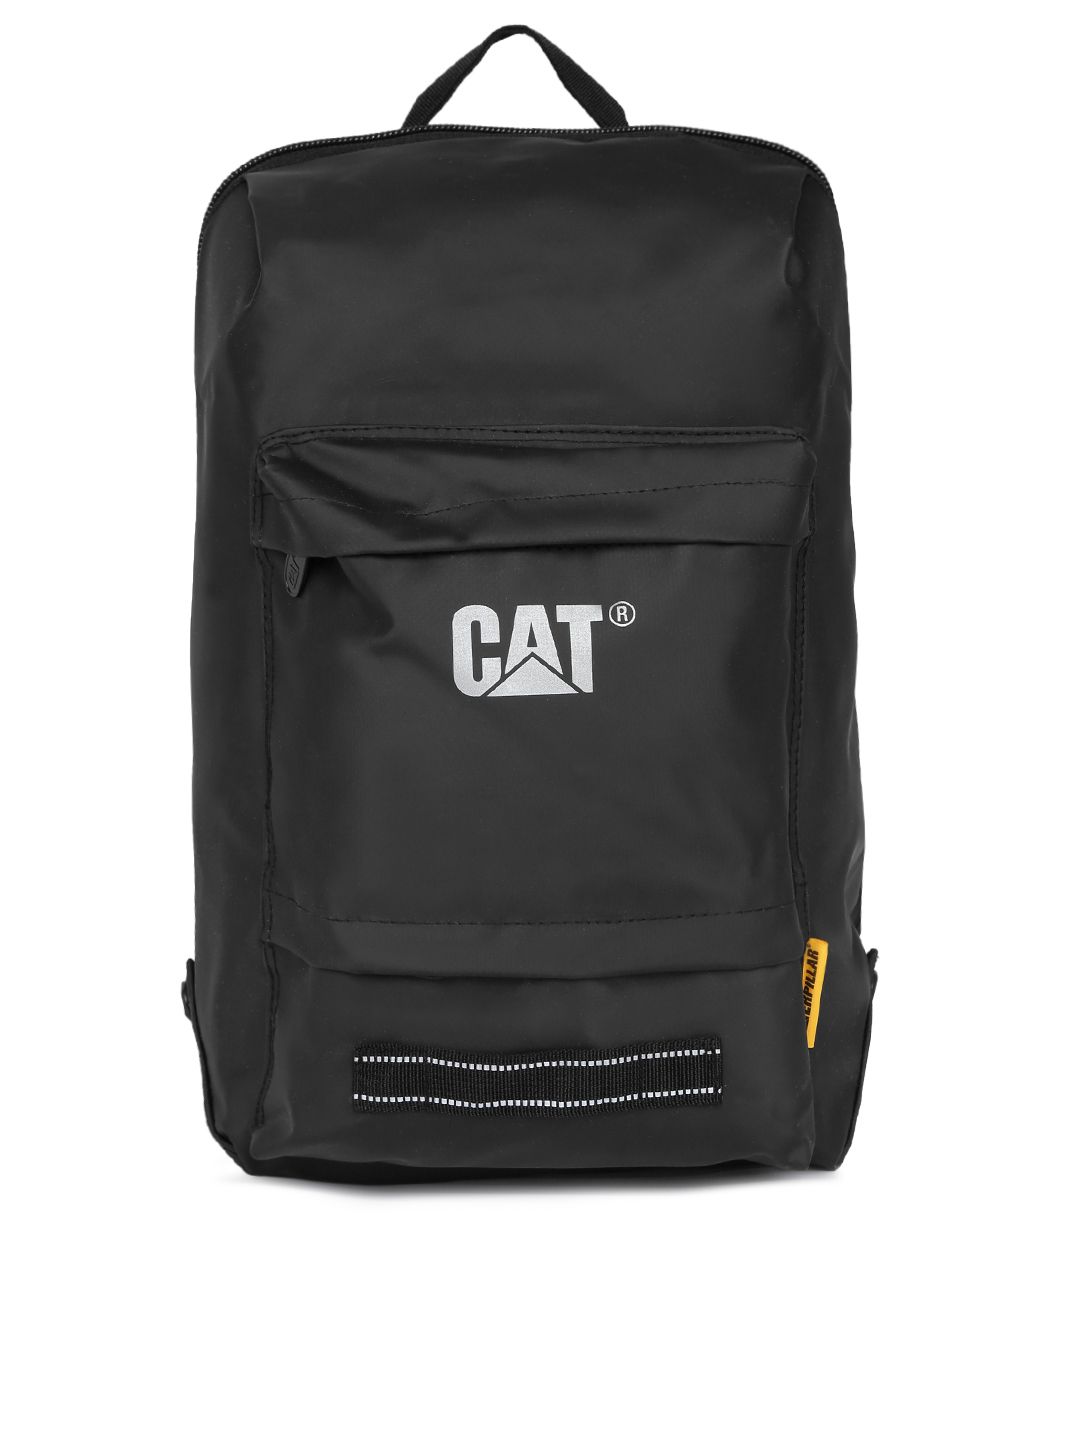 CAT Unisex Black Solid Verso Backpack Price in India